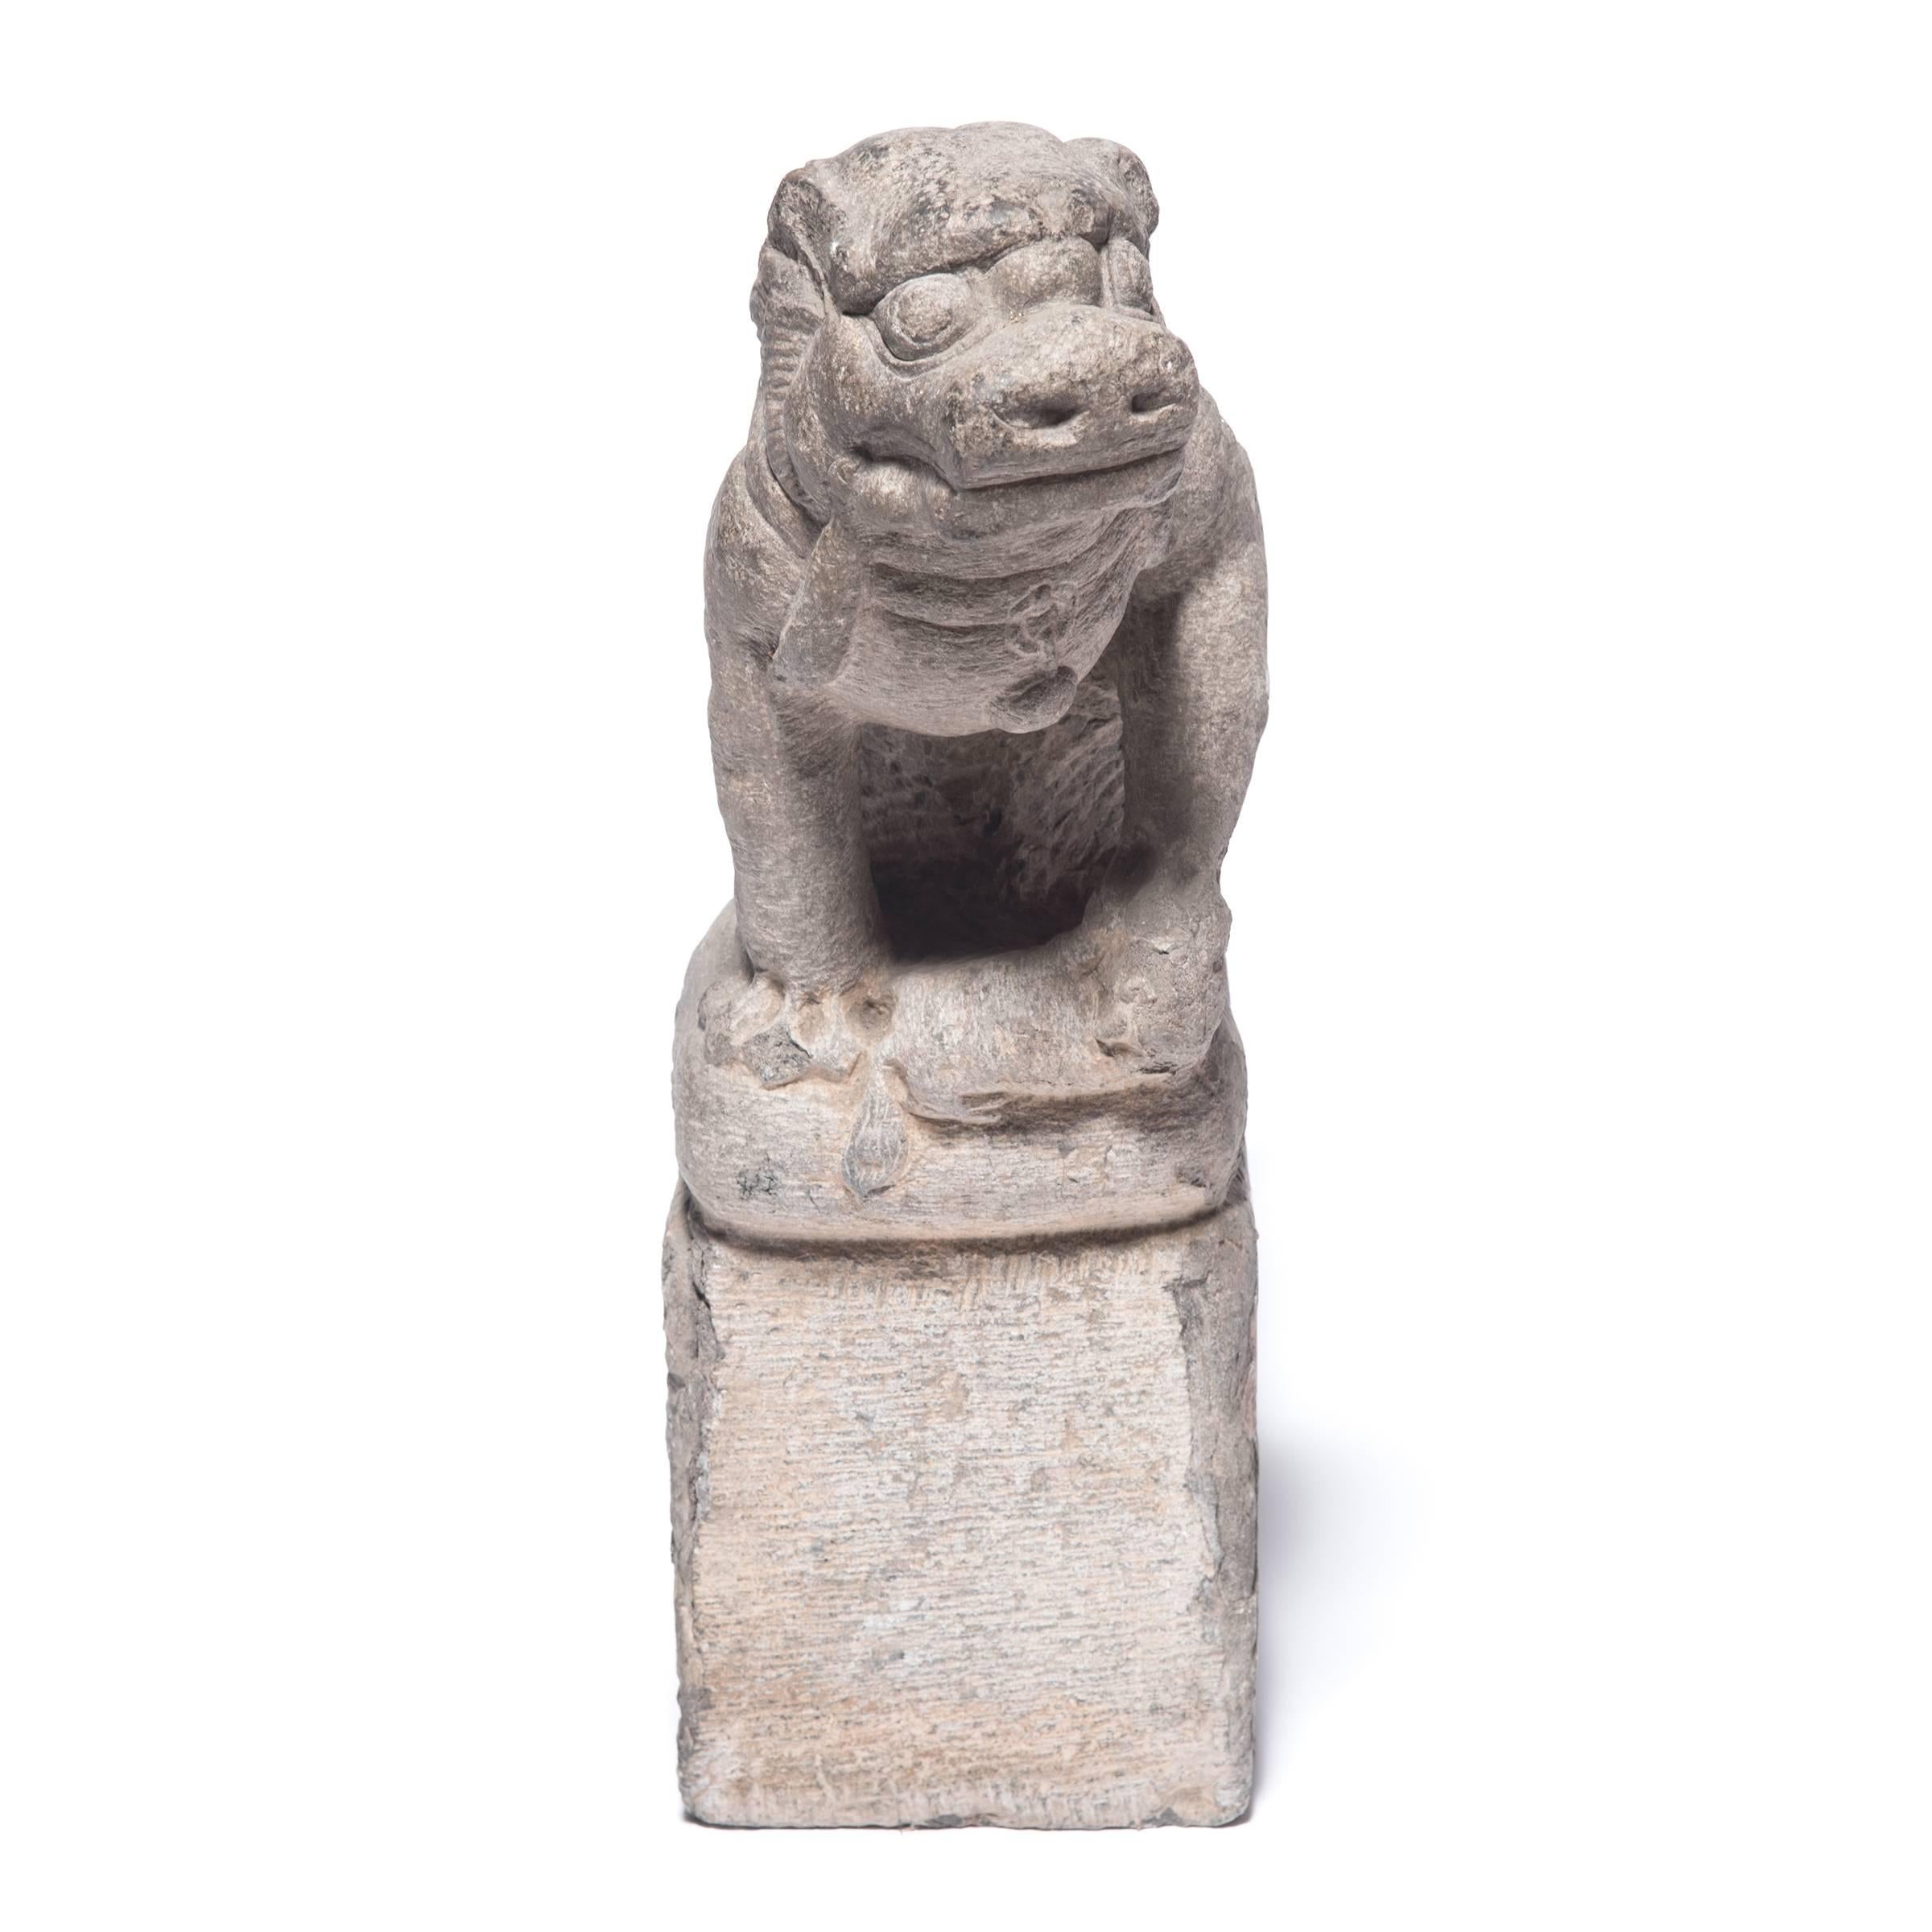 This pair of limestone Fu dogs once protected a grand courtyard home in 19th century, China. Skilfully carved in attentive postures, the lion-like dogs are “shizi,” symbols of power and grandeur that were believed to offer protection from evil